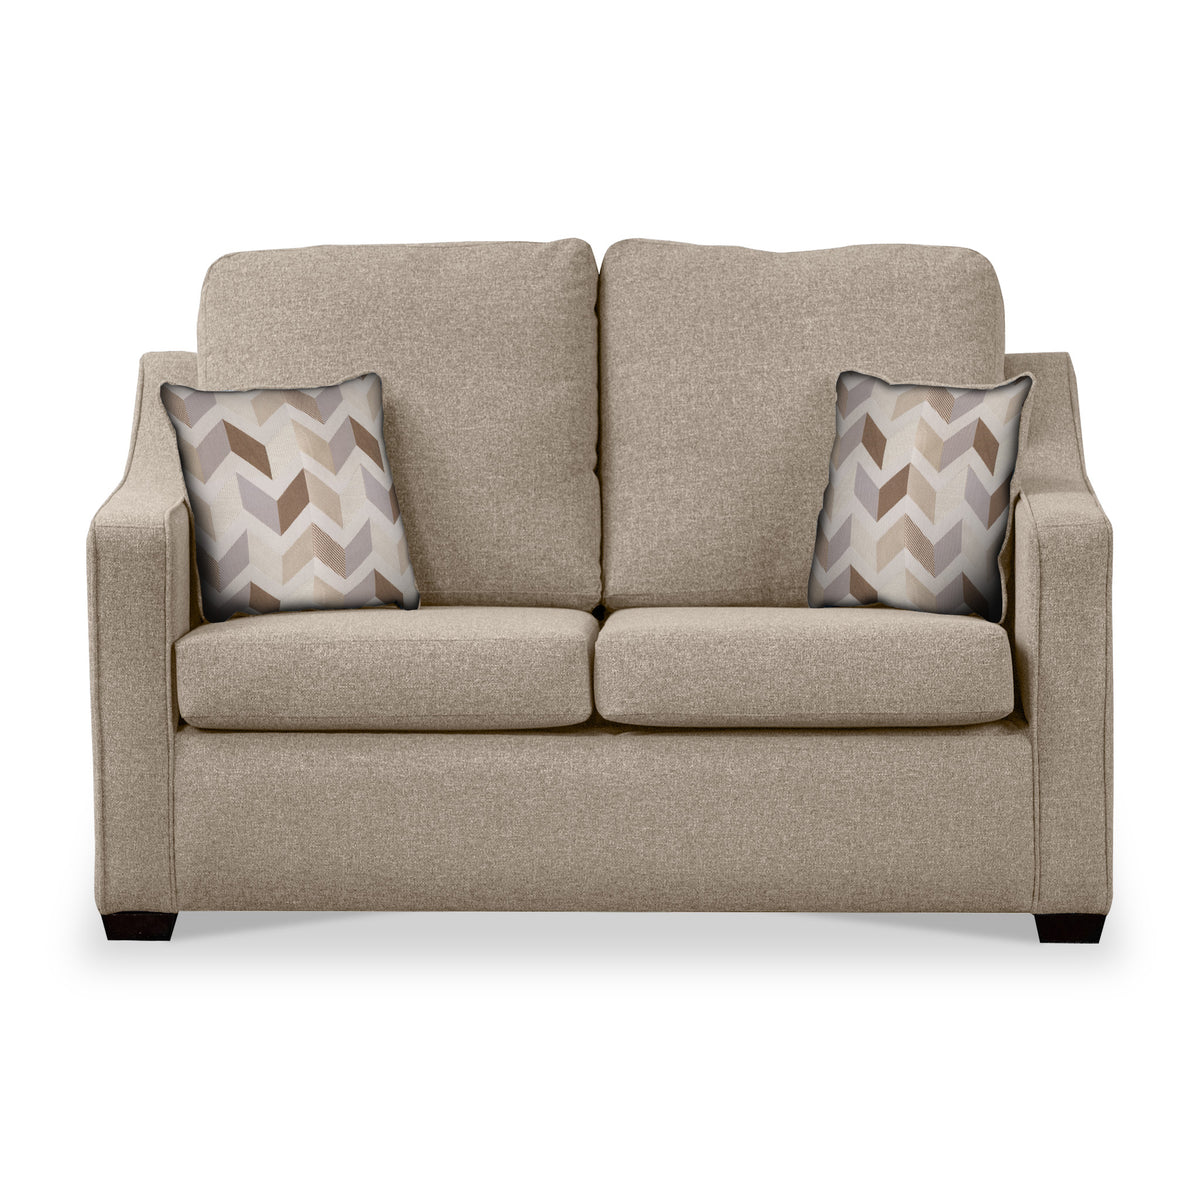 Charlcote Oatmeal Faux Linen 2 Seater Sofabed with Oatmeal Scatter Cushions from Roseland Furniture